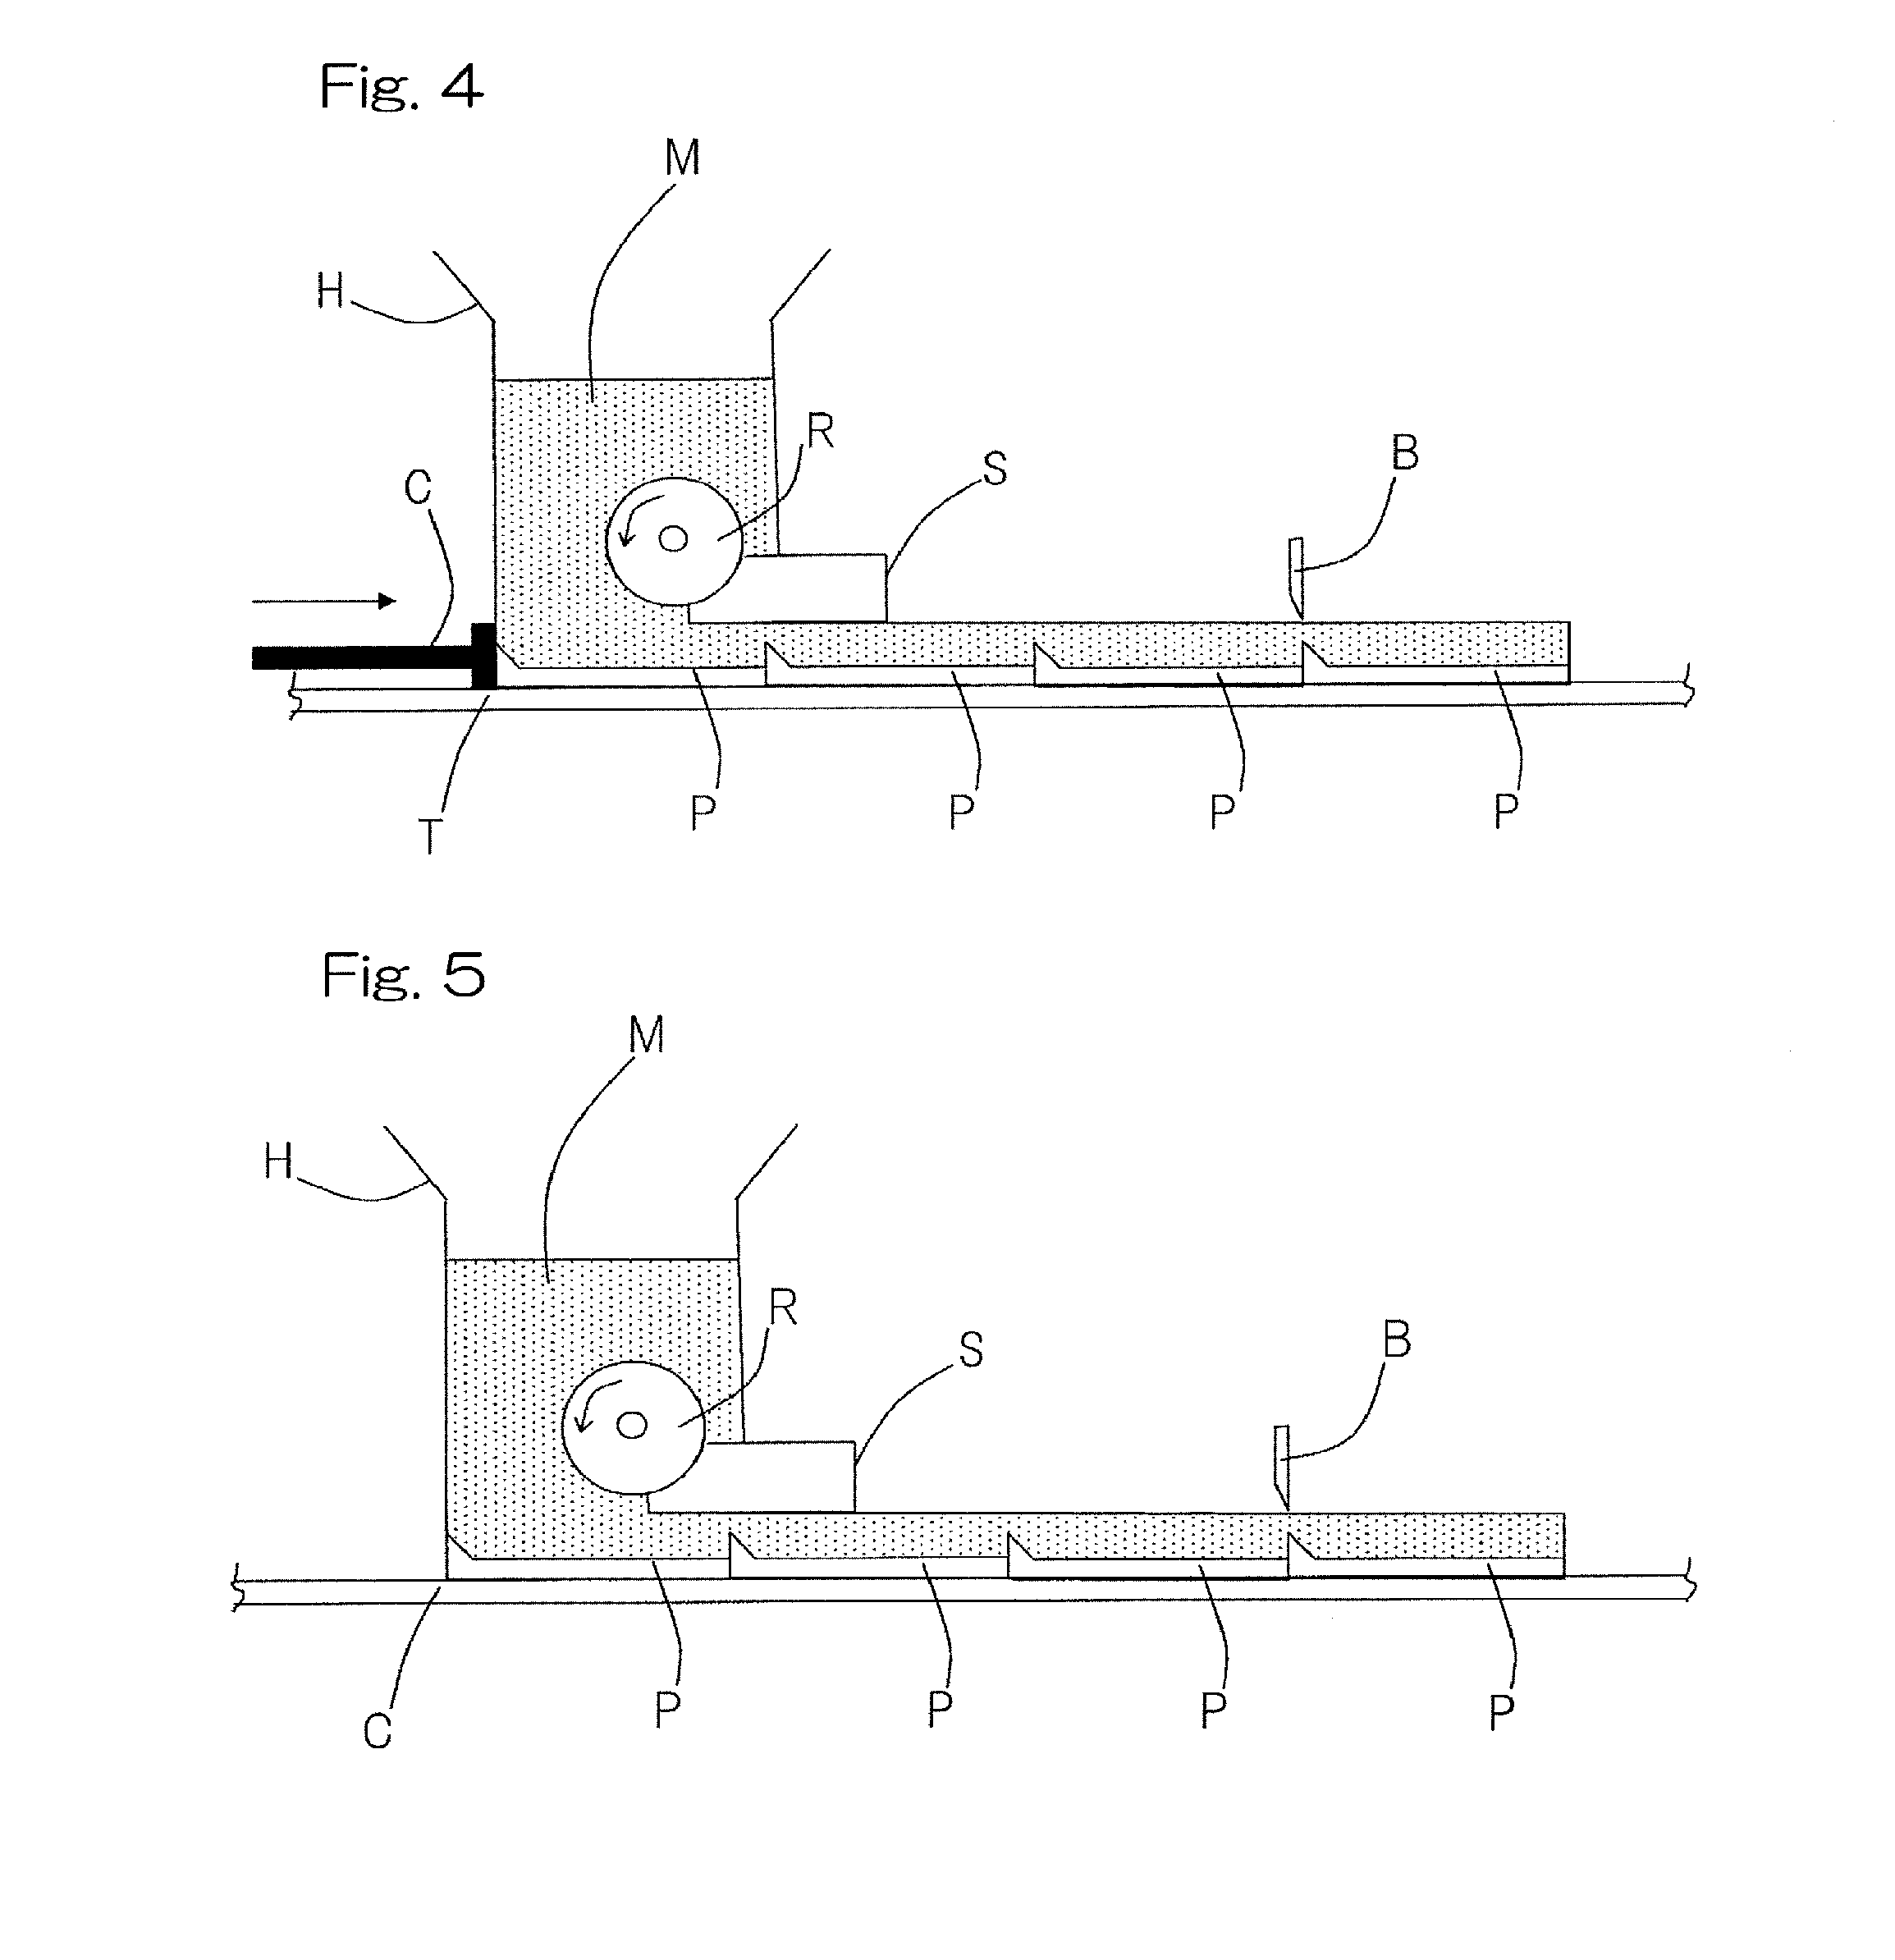 Concrete tile and molding material for same